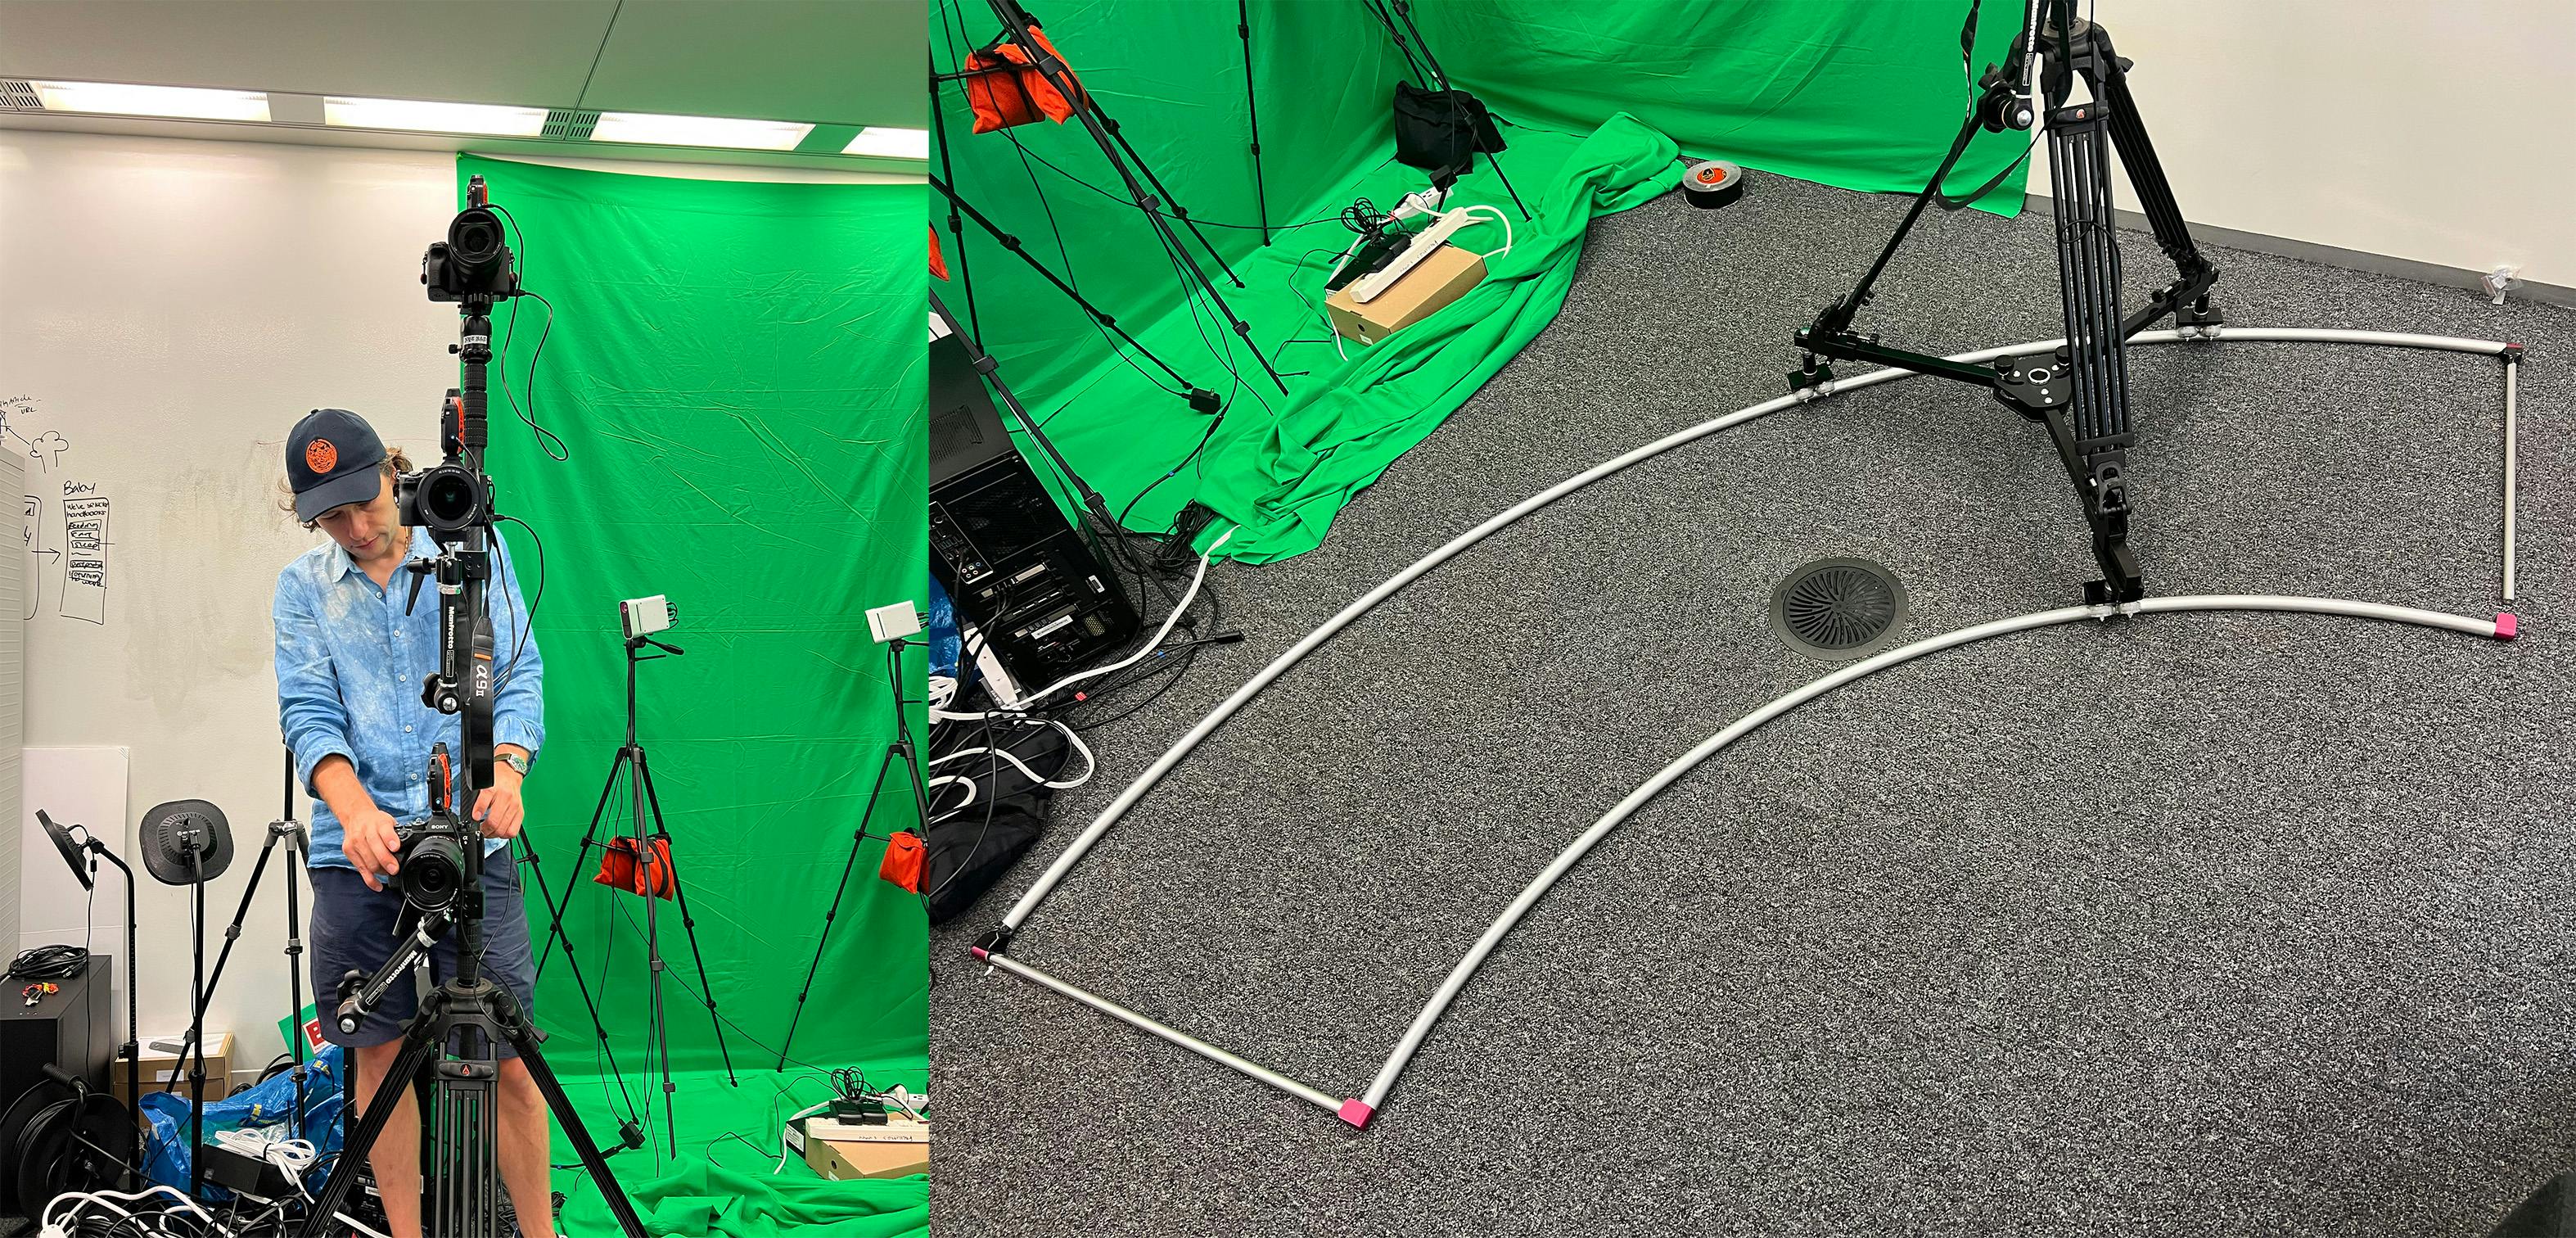 Left image is a man adjusting a camera rig in front of a green screen. Right image is a photo of the floor, where a the camera tripod is placed on a curved dolly track